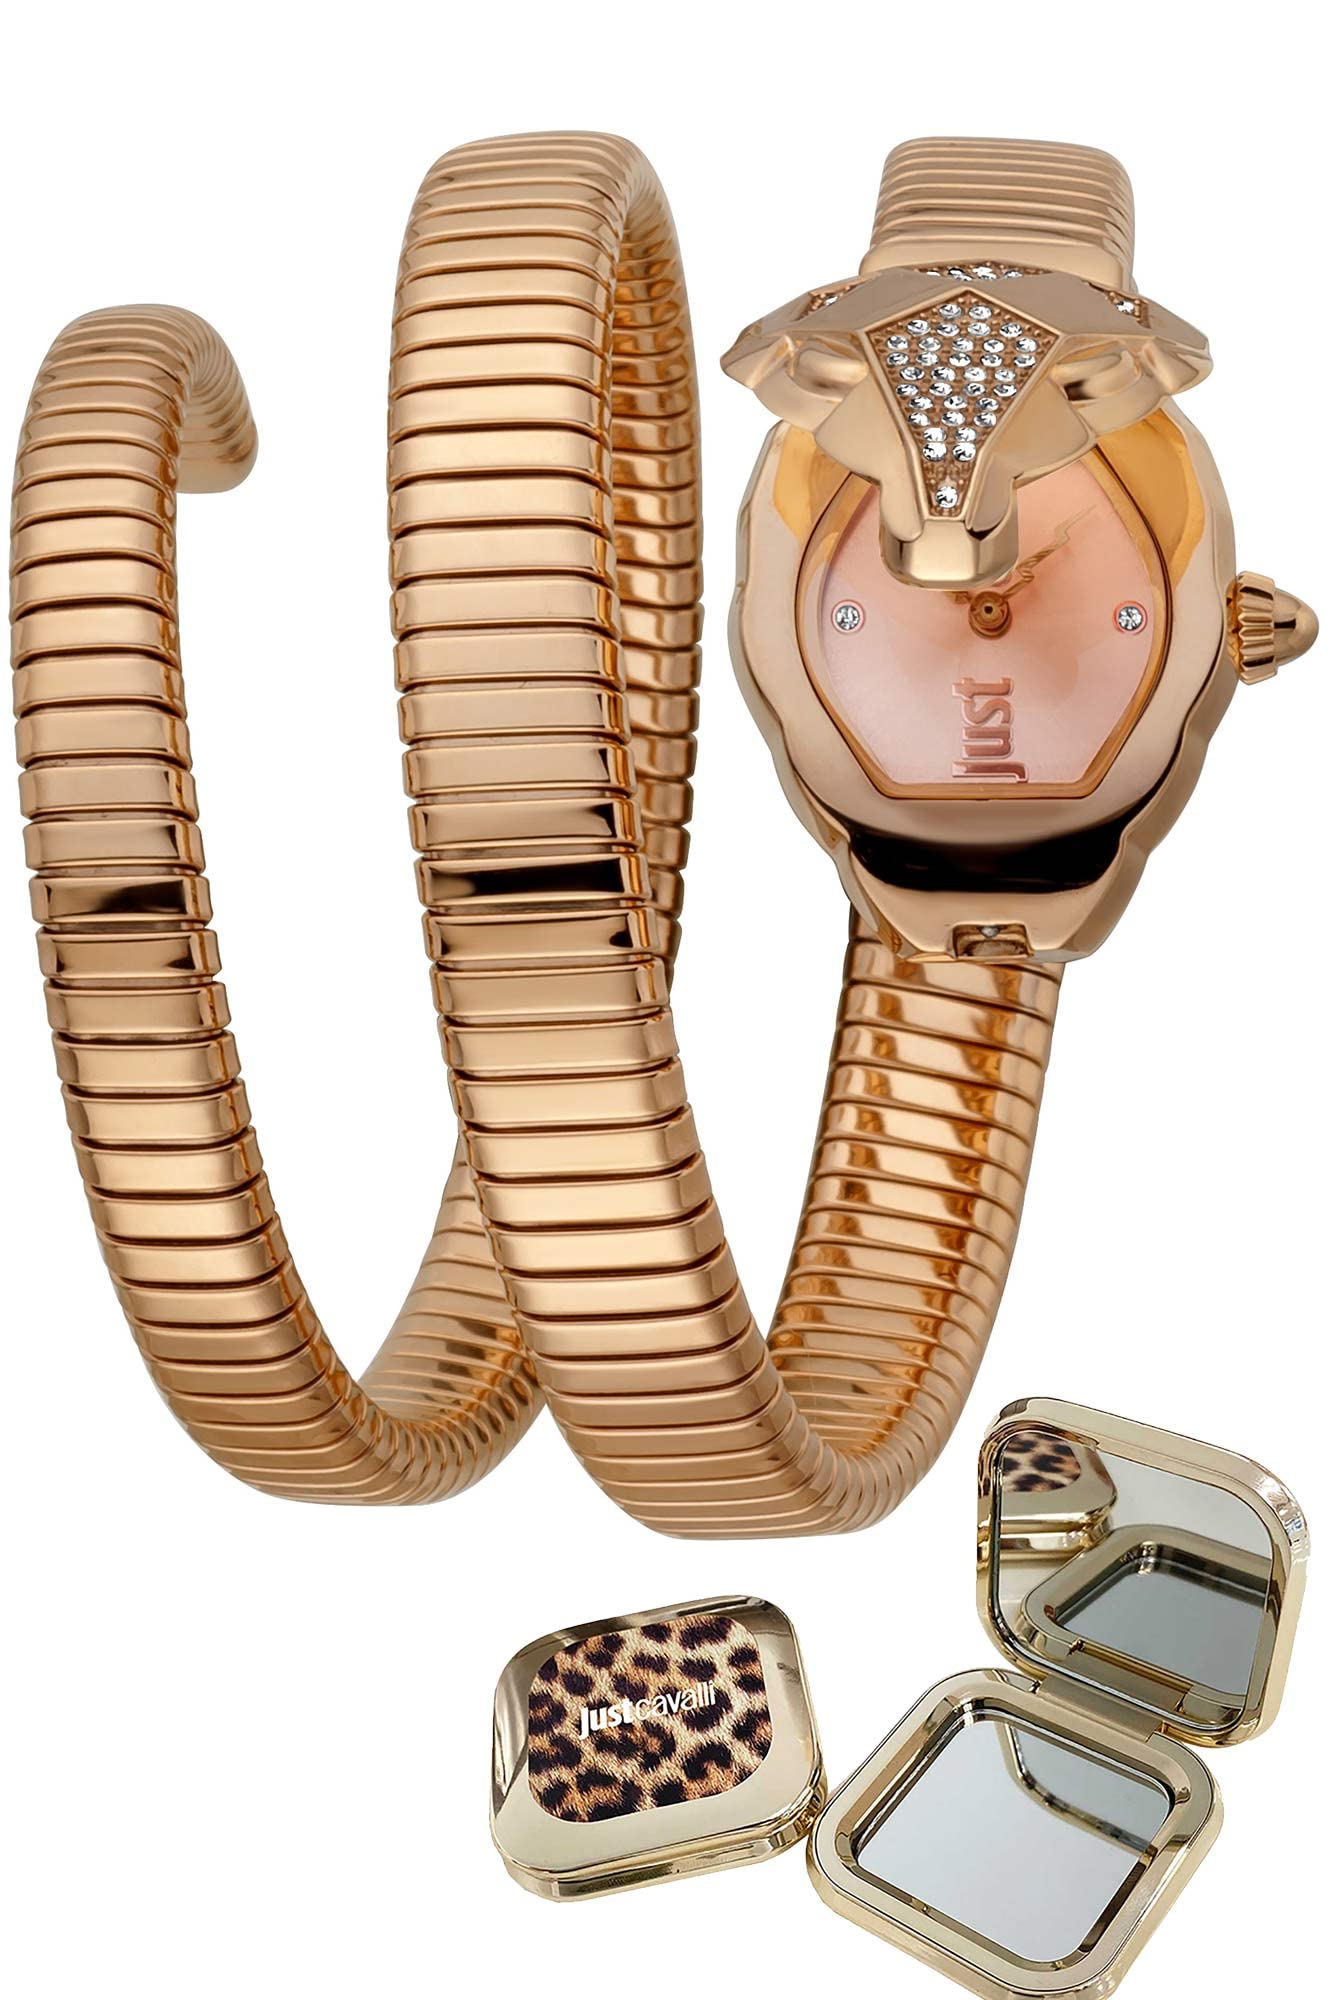 Just Cavalli Women's Quartz Watch with Stainless Steel Strap, Rose Gold, 18 (Model: JC1L073M0035), Pink